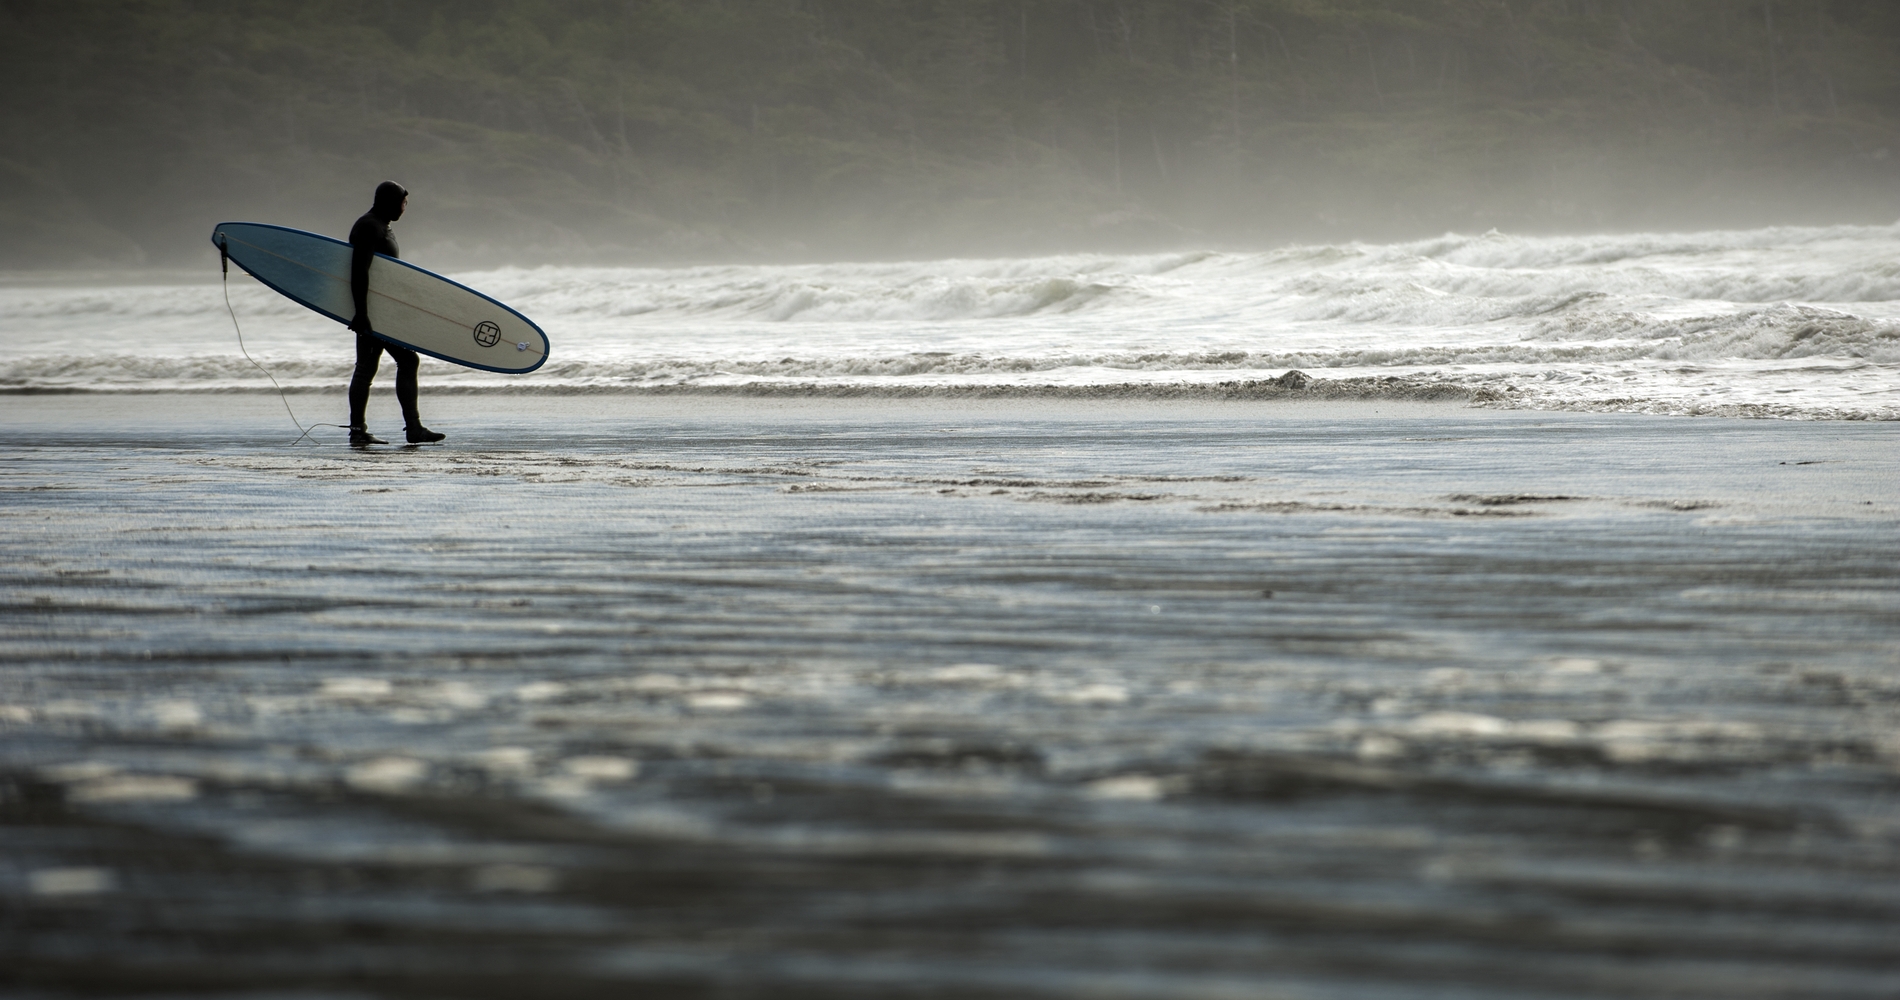 Autumn surfing at Cox Bay in Tofino